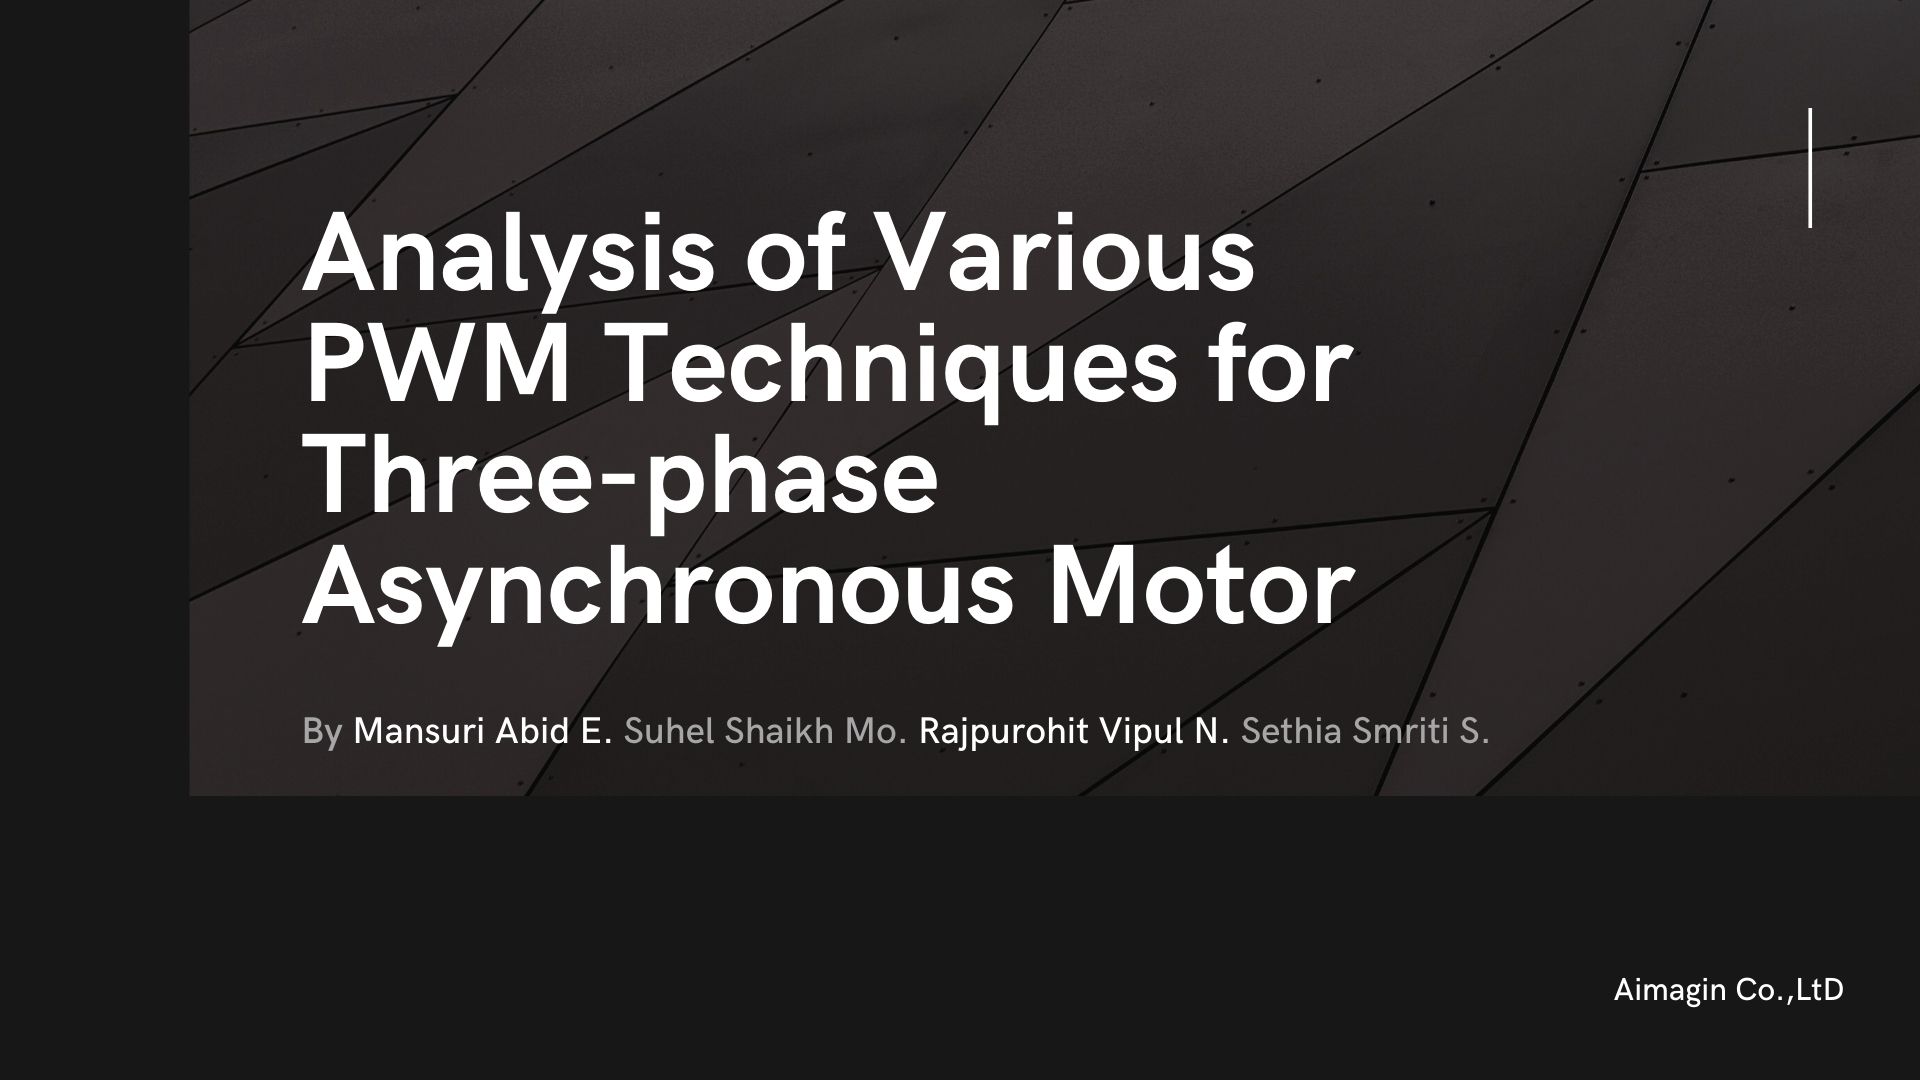 Analysis of Various PWM Techniques for Three-phase Asynchronous Motor